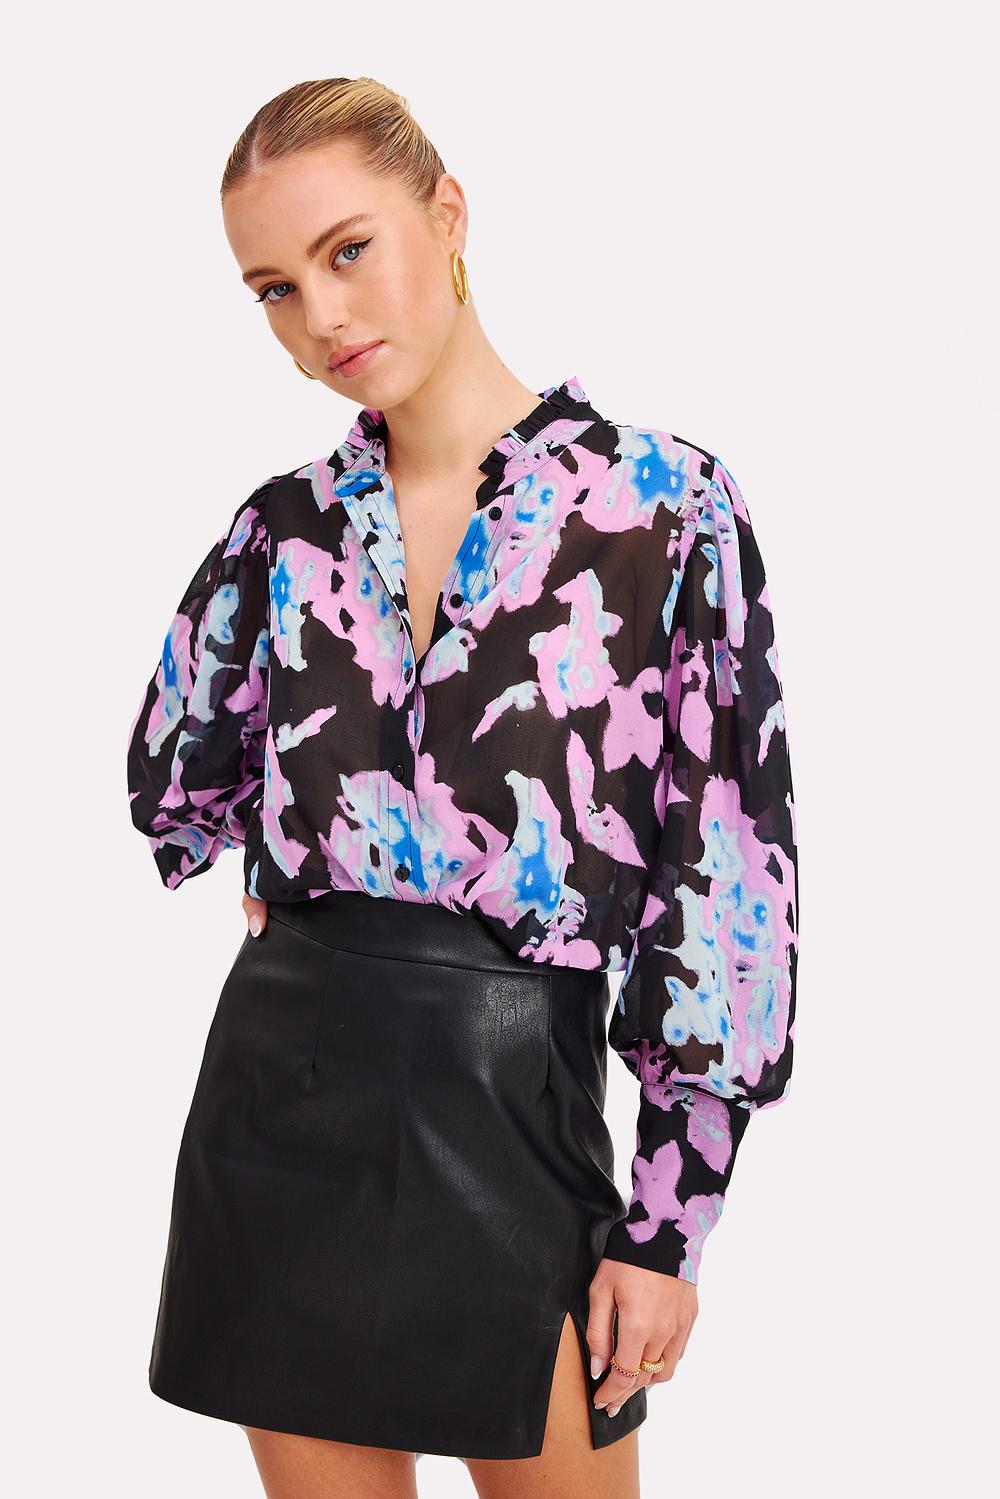 Black blouse with floral print